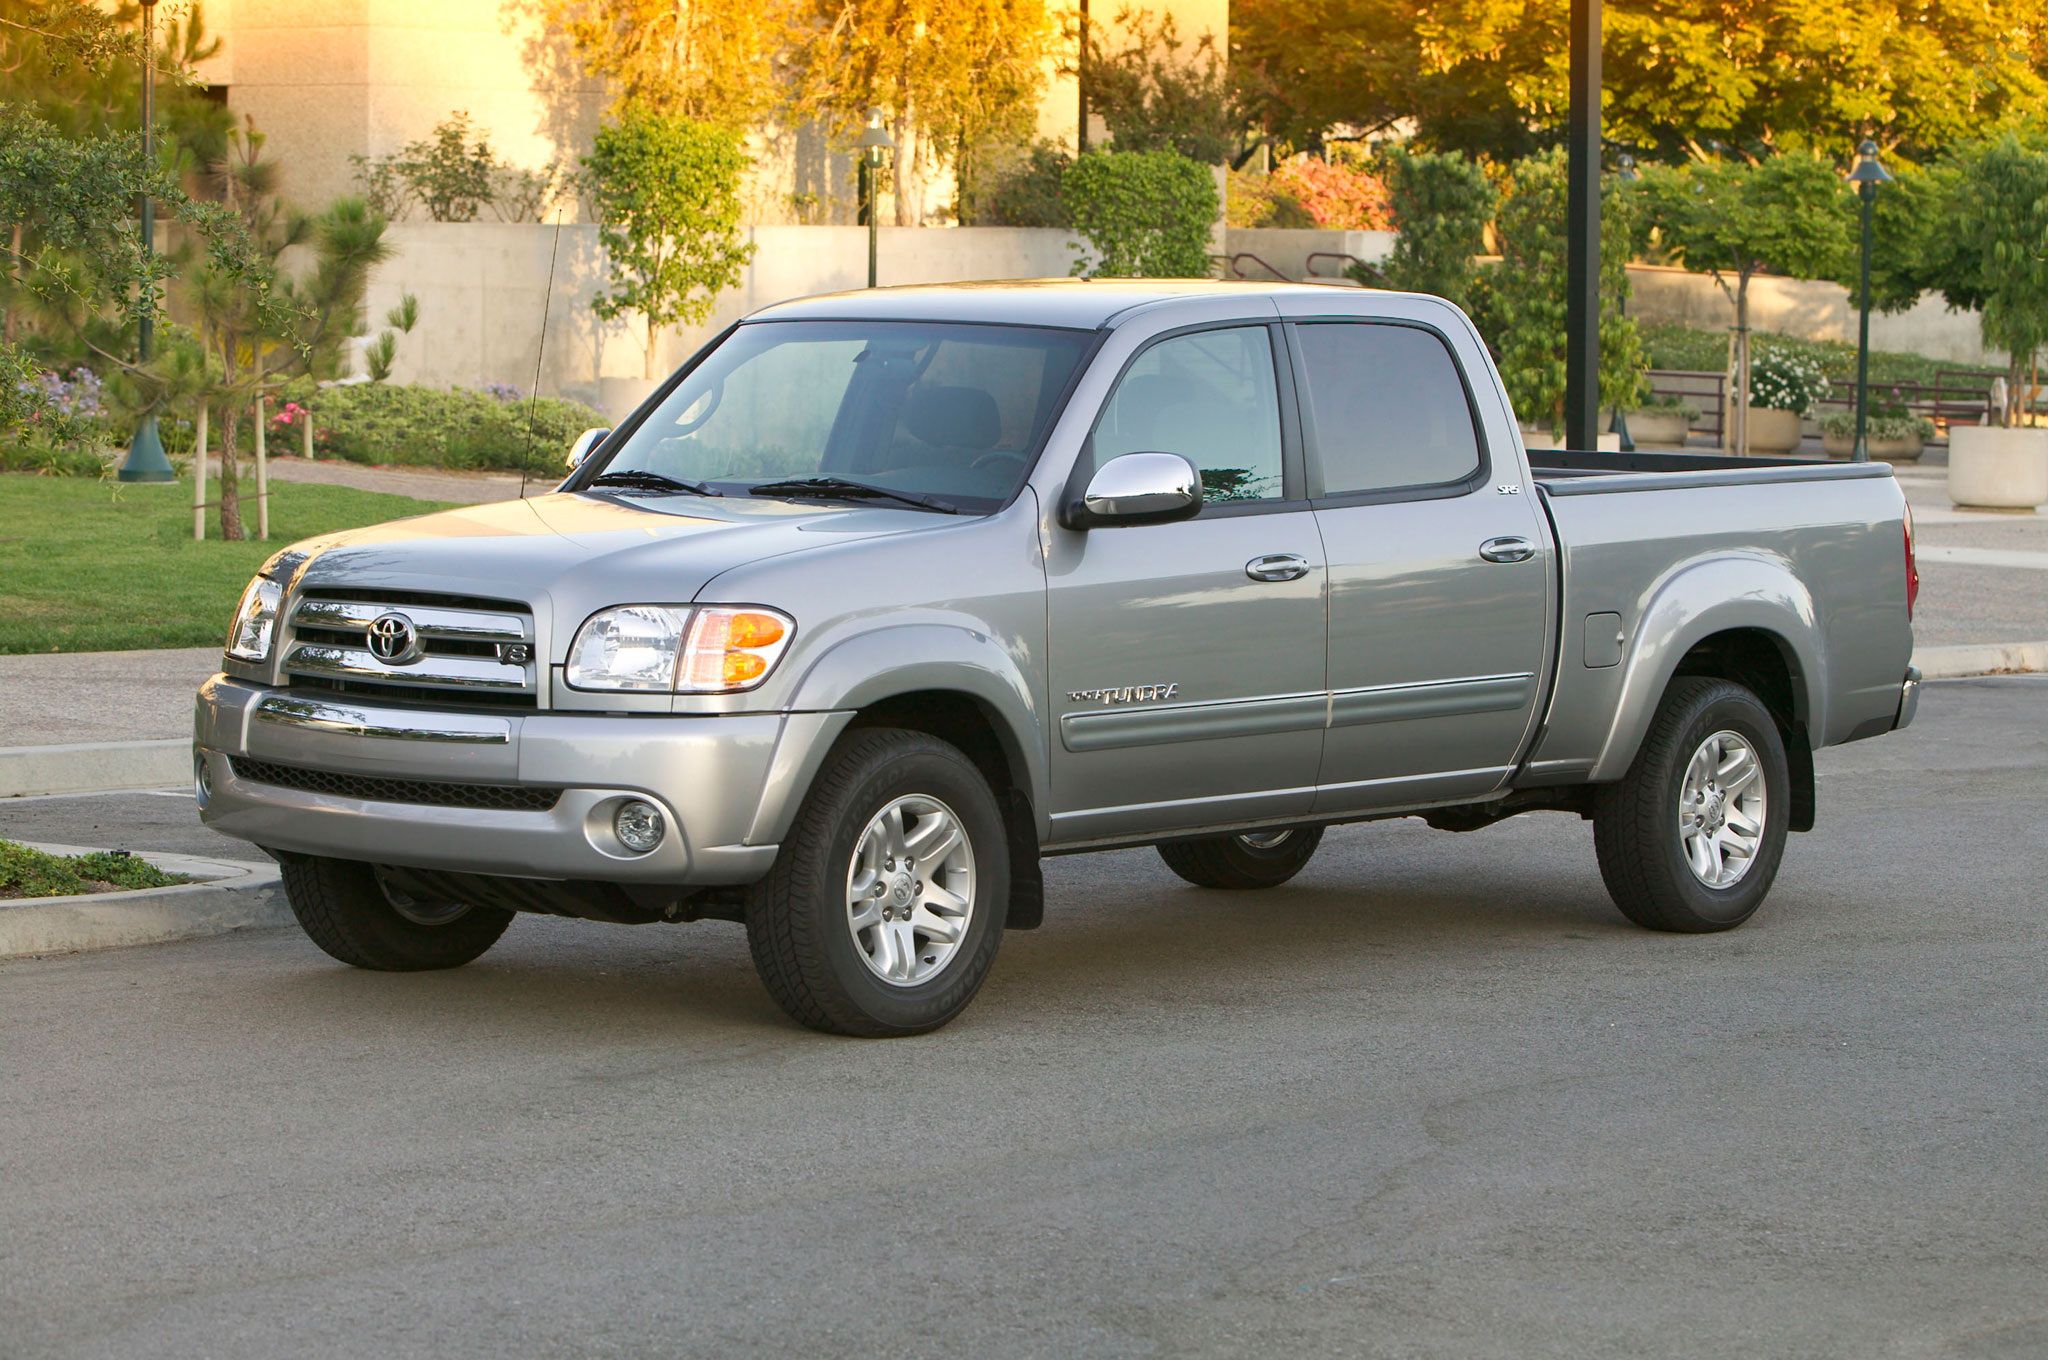 2005 Toyota Tundra parked on the side of the road